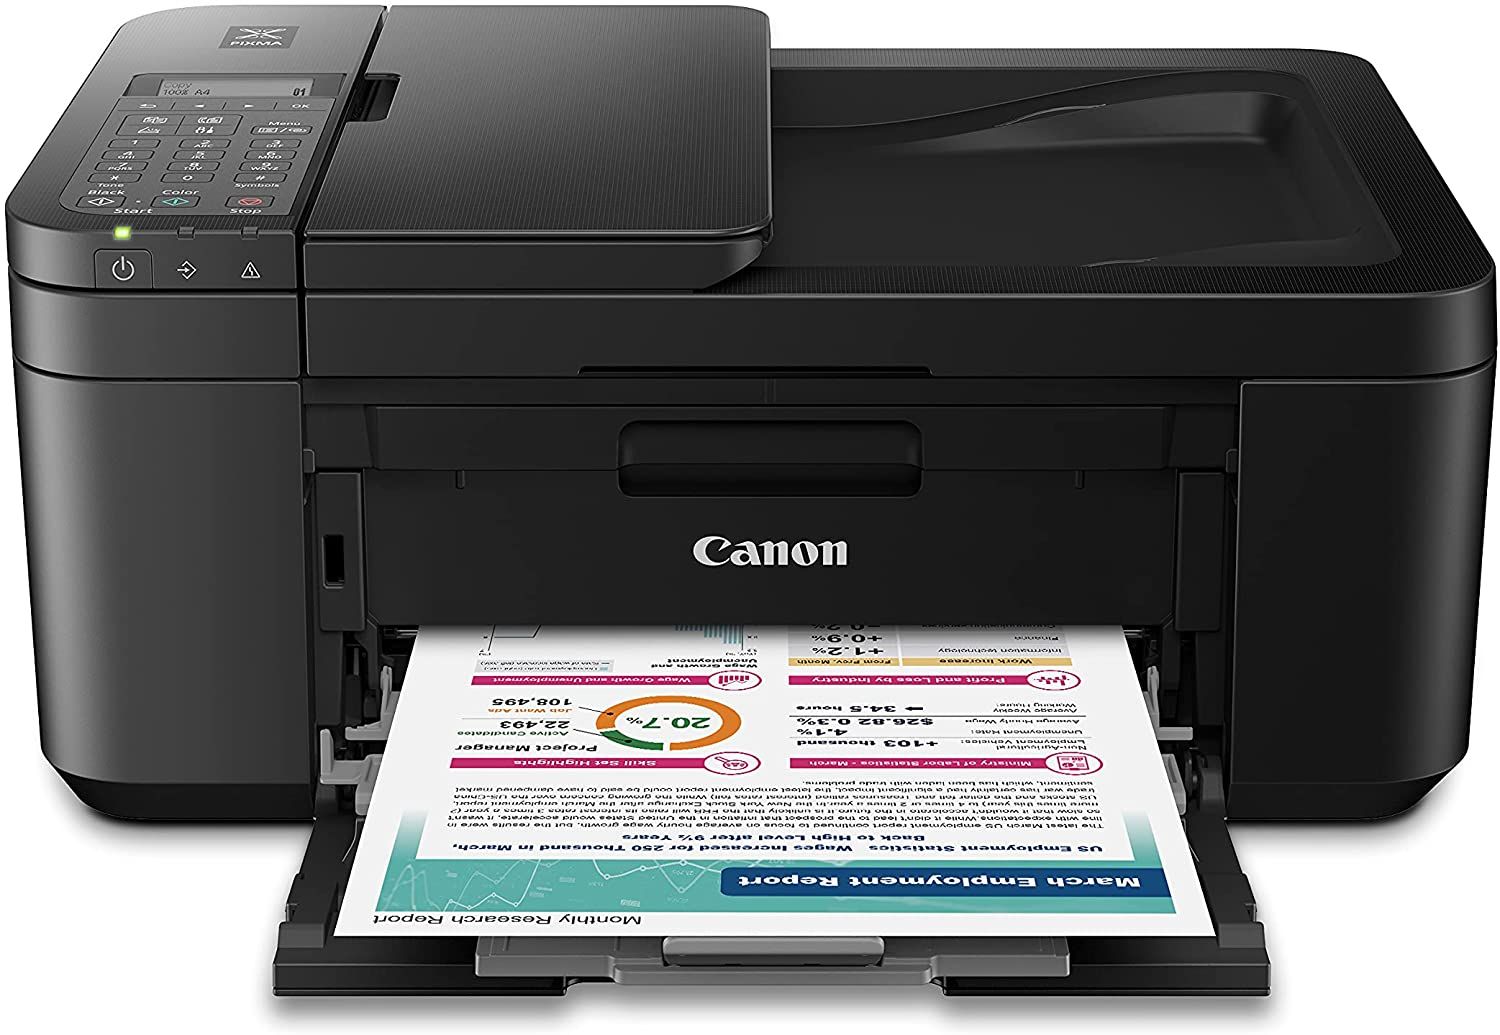 The 10 Best home AllinOne Printers of 2021 ReviewThis